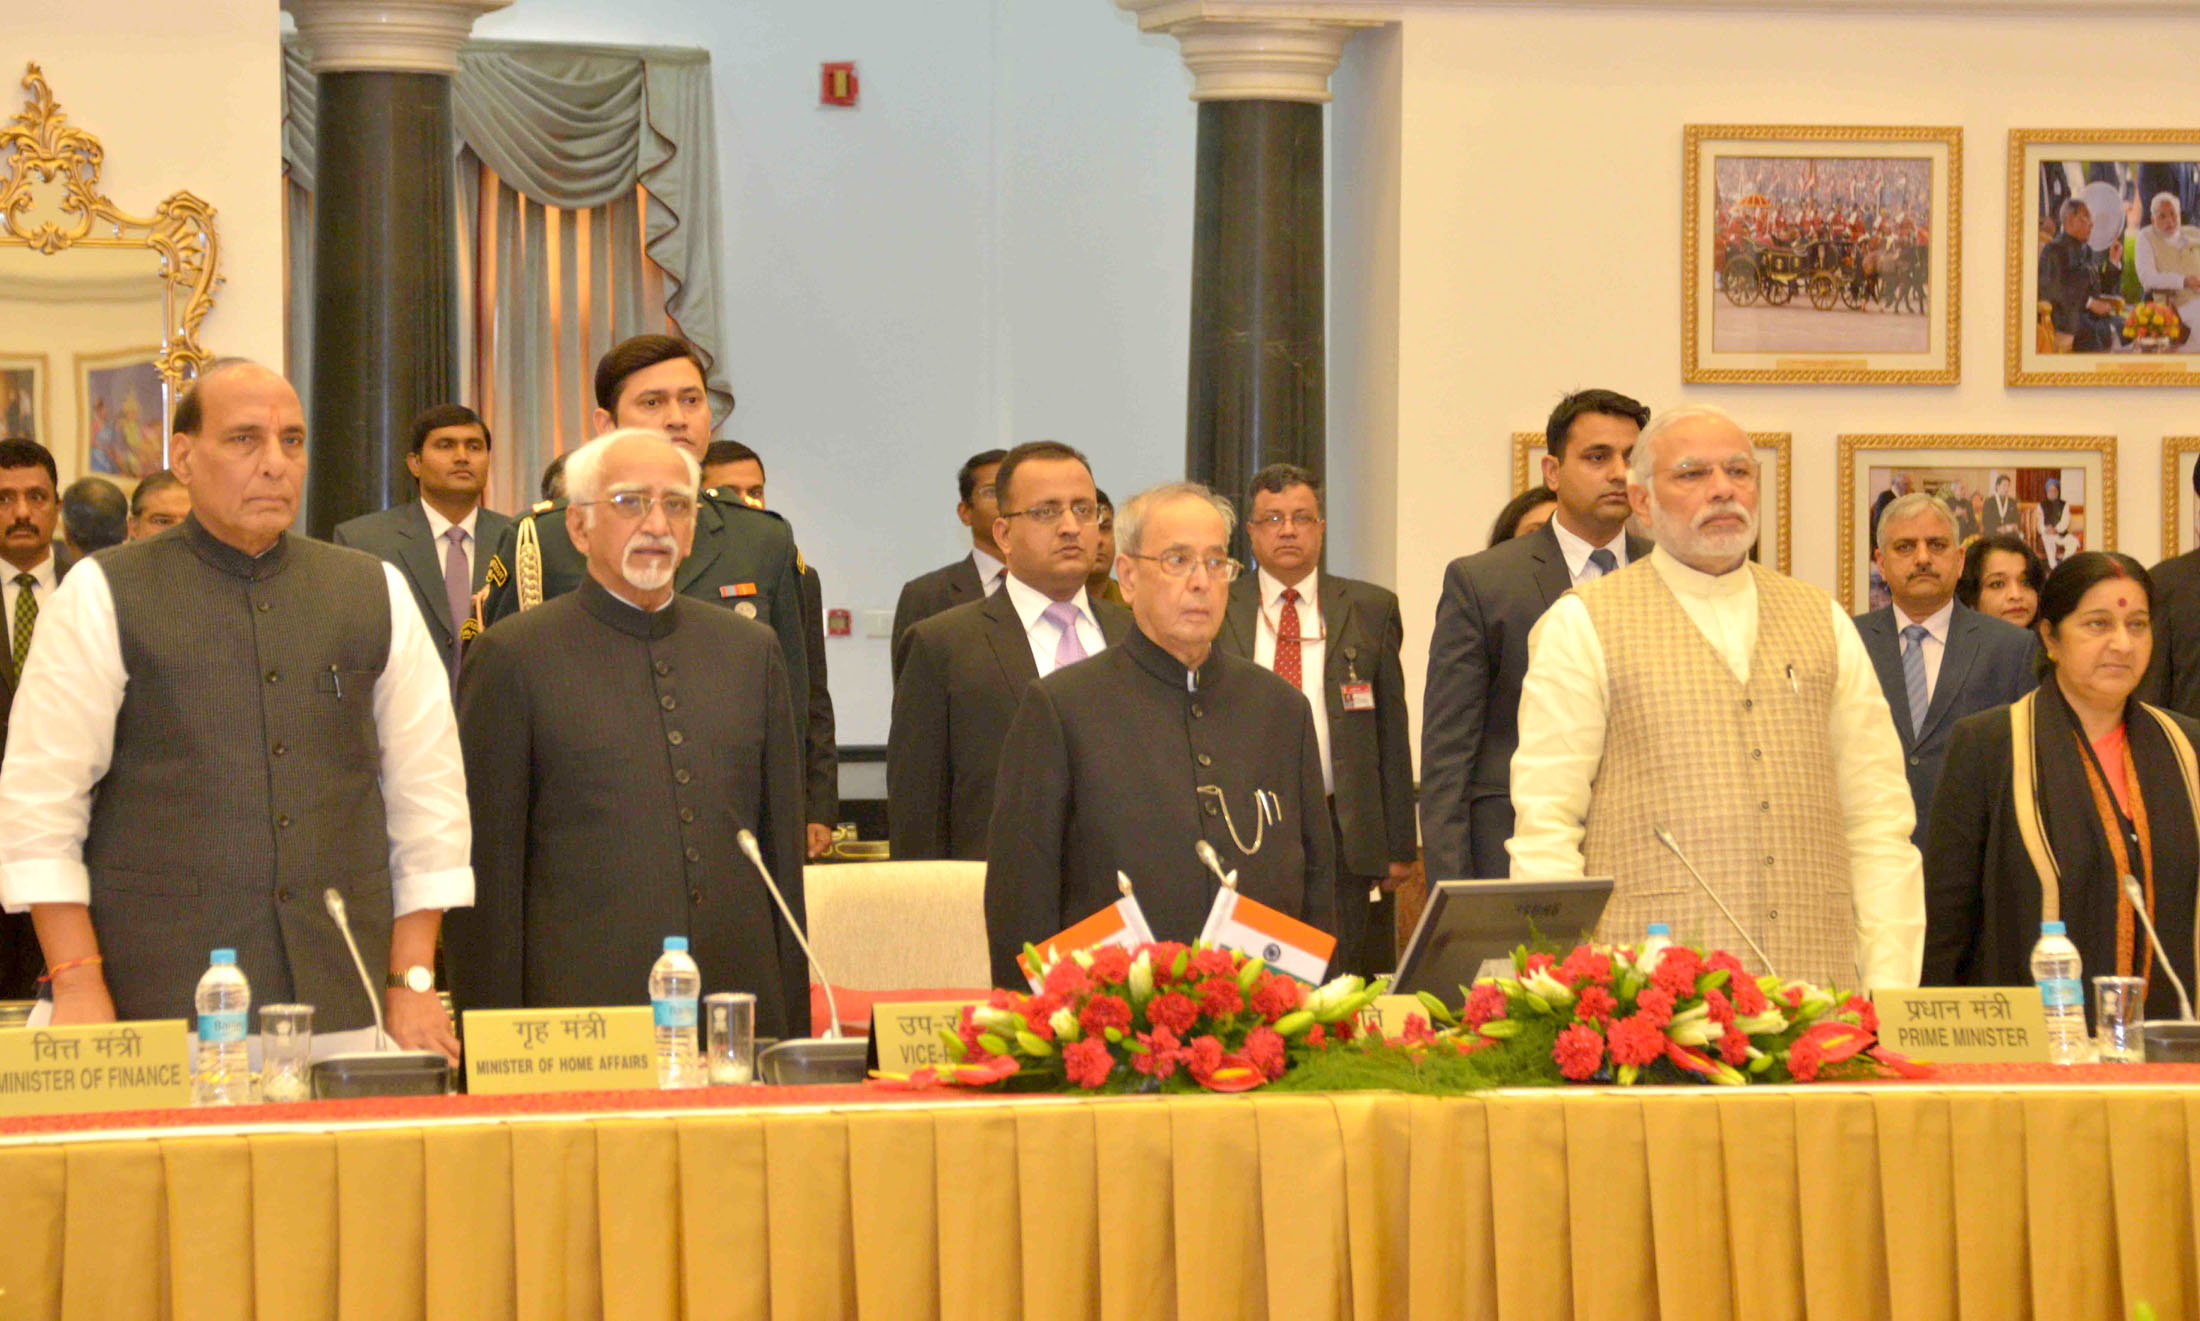 The President, Shri Pranab Mukherjee, the Vice President, Shri M. Hamid Ansari, the Prime Minister, Shri Narendra Modi, the Union Home Minister, Shri Rajnath Singh and the Union Minister for External Affairs and Overseas Indian Affairs, Smt. Sushma Swaraj at the Governors Conference, at Rashtrapati Bhavan, in New Delhi on February 09, 2016.